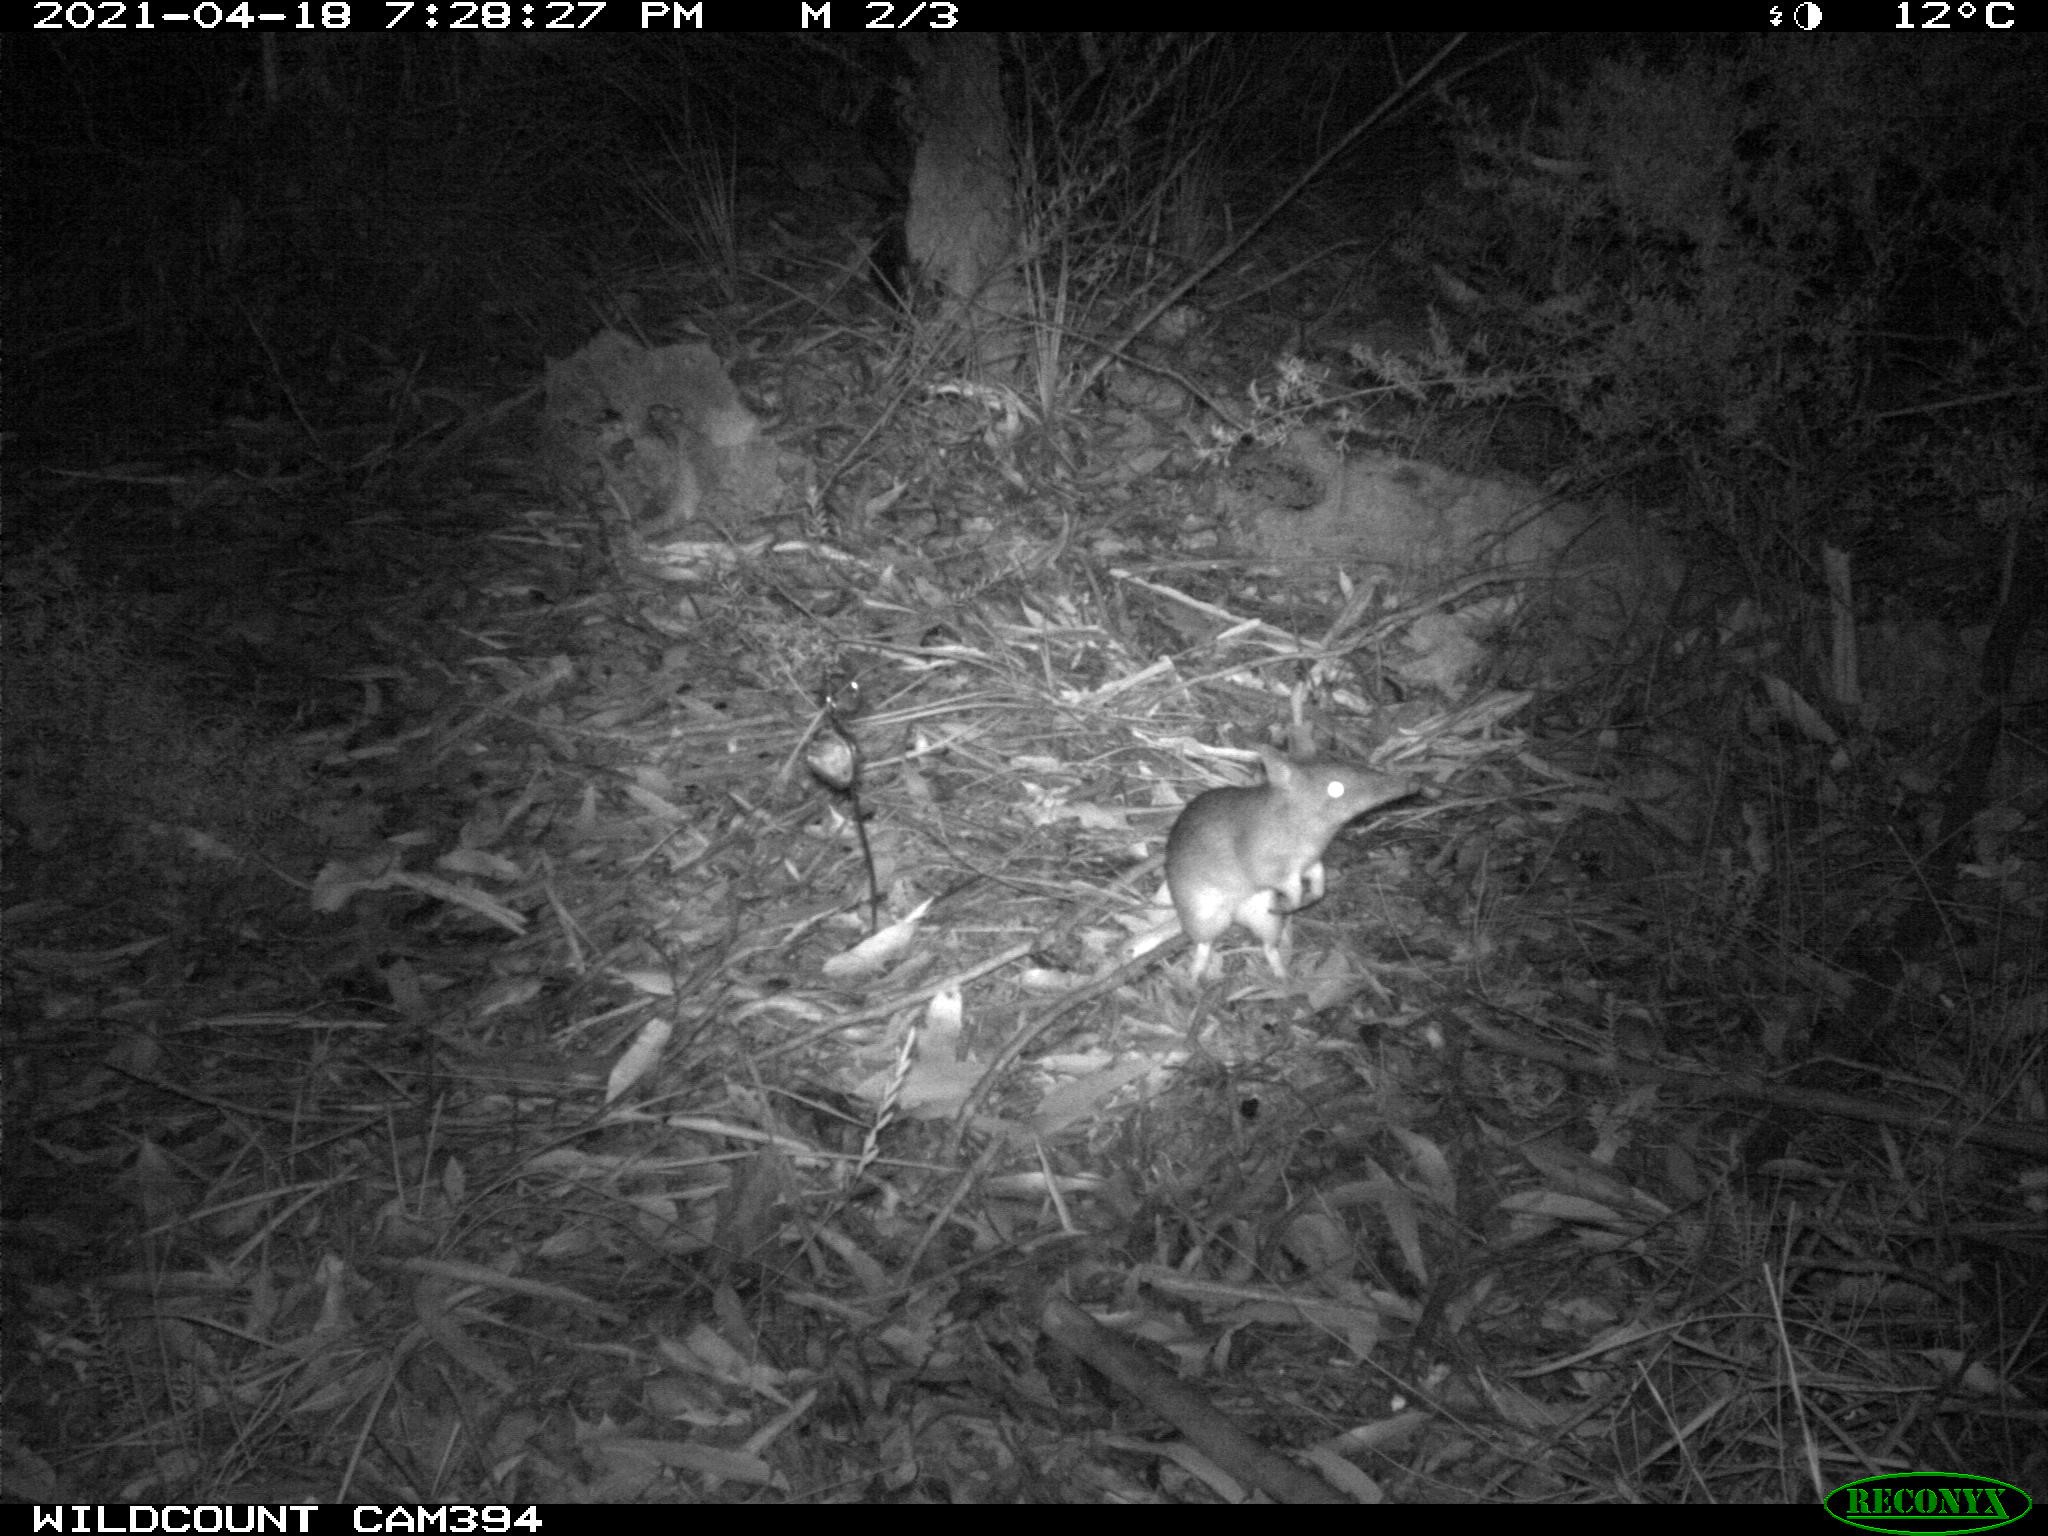 Black and white photo capturing a bandicoot standing on leaf litter